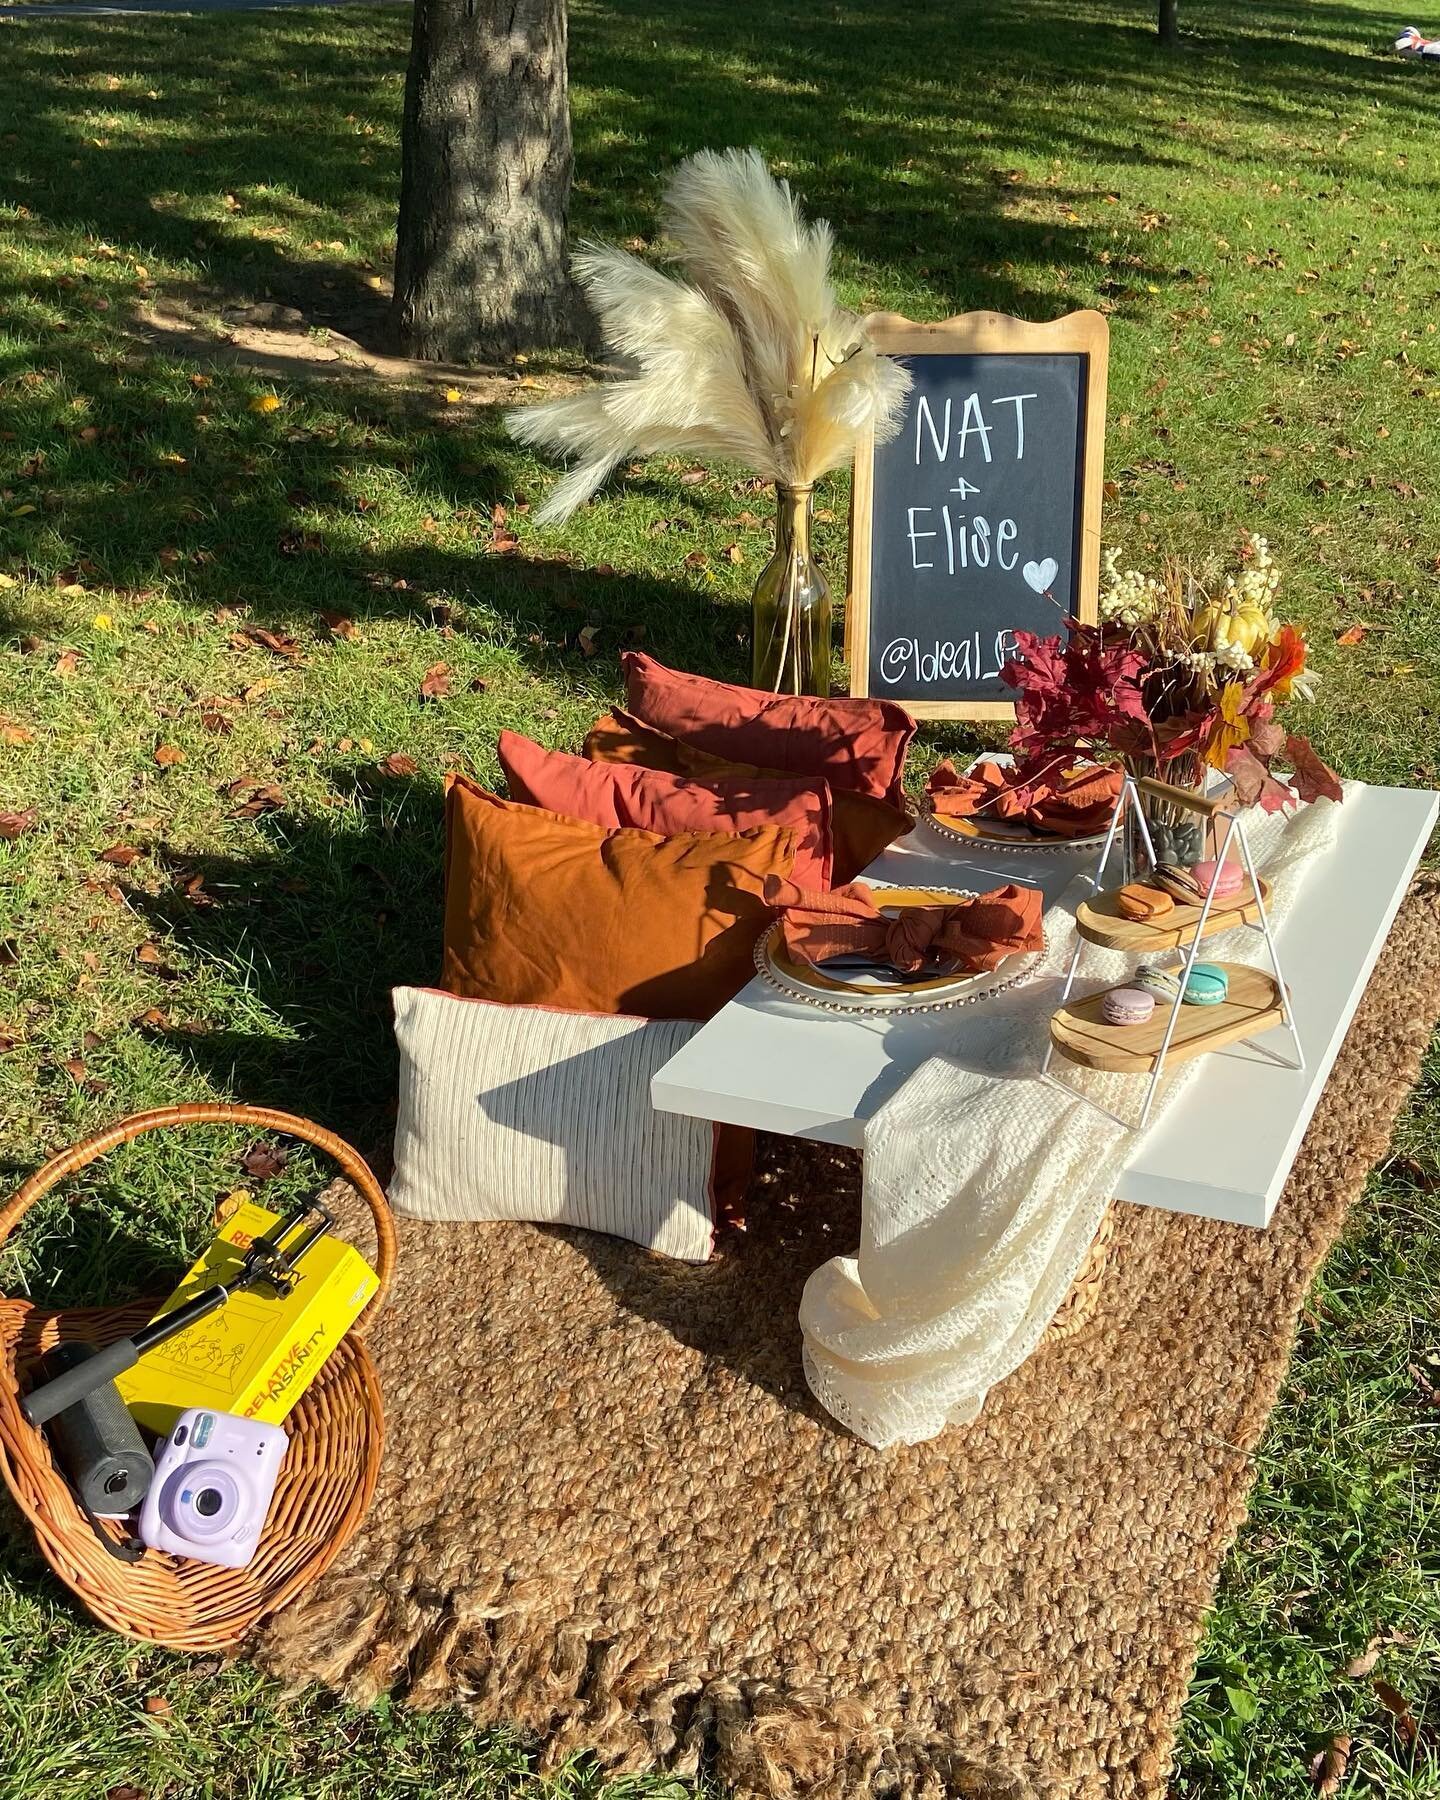 Grab a friend and enjoy a luxury experience with us ! 🧡✨

&ldquo;Picnic for 2&rdquo; Package 

BOOKING FOR OCTOBER IS STILL AVAILABLE ✨✨

#dmv #idealpicnic #dmvpicnic #luxurypicnics #dmvluxurypicnic #dmvdatenights #dmvdatenightidea #falldecor